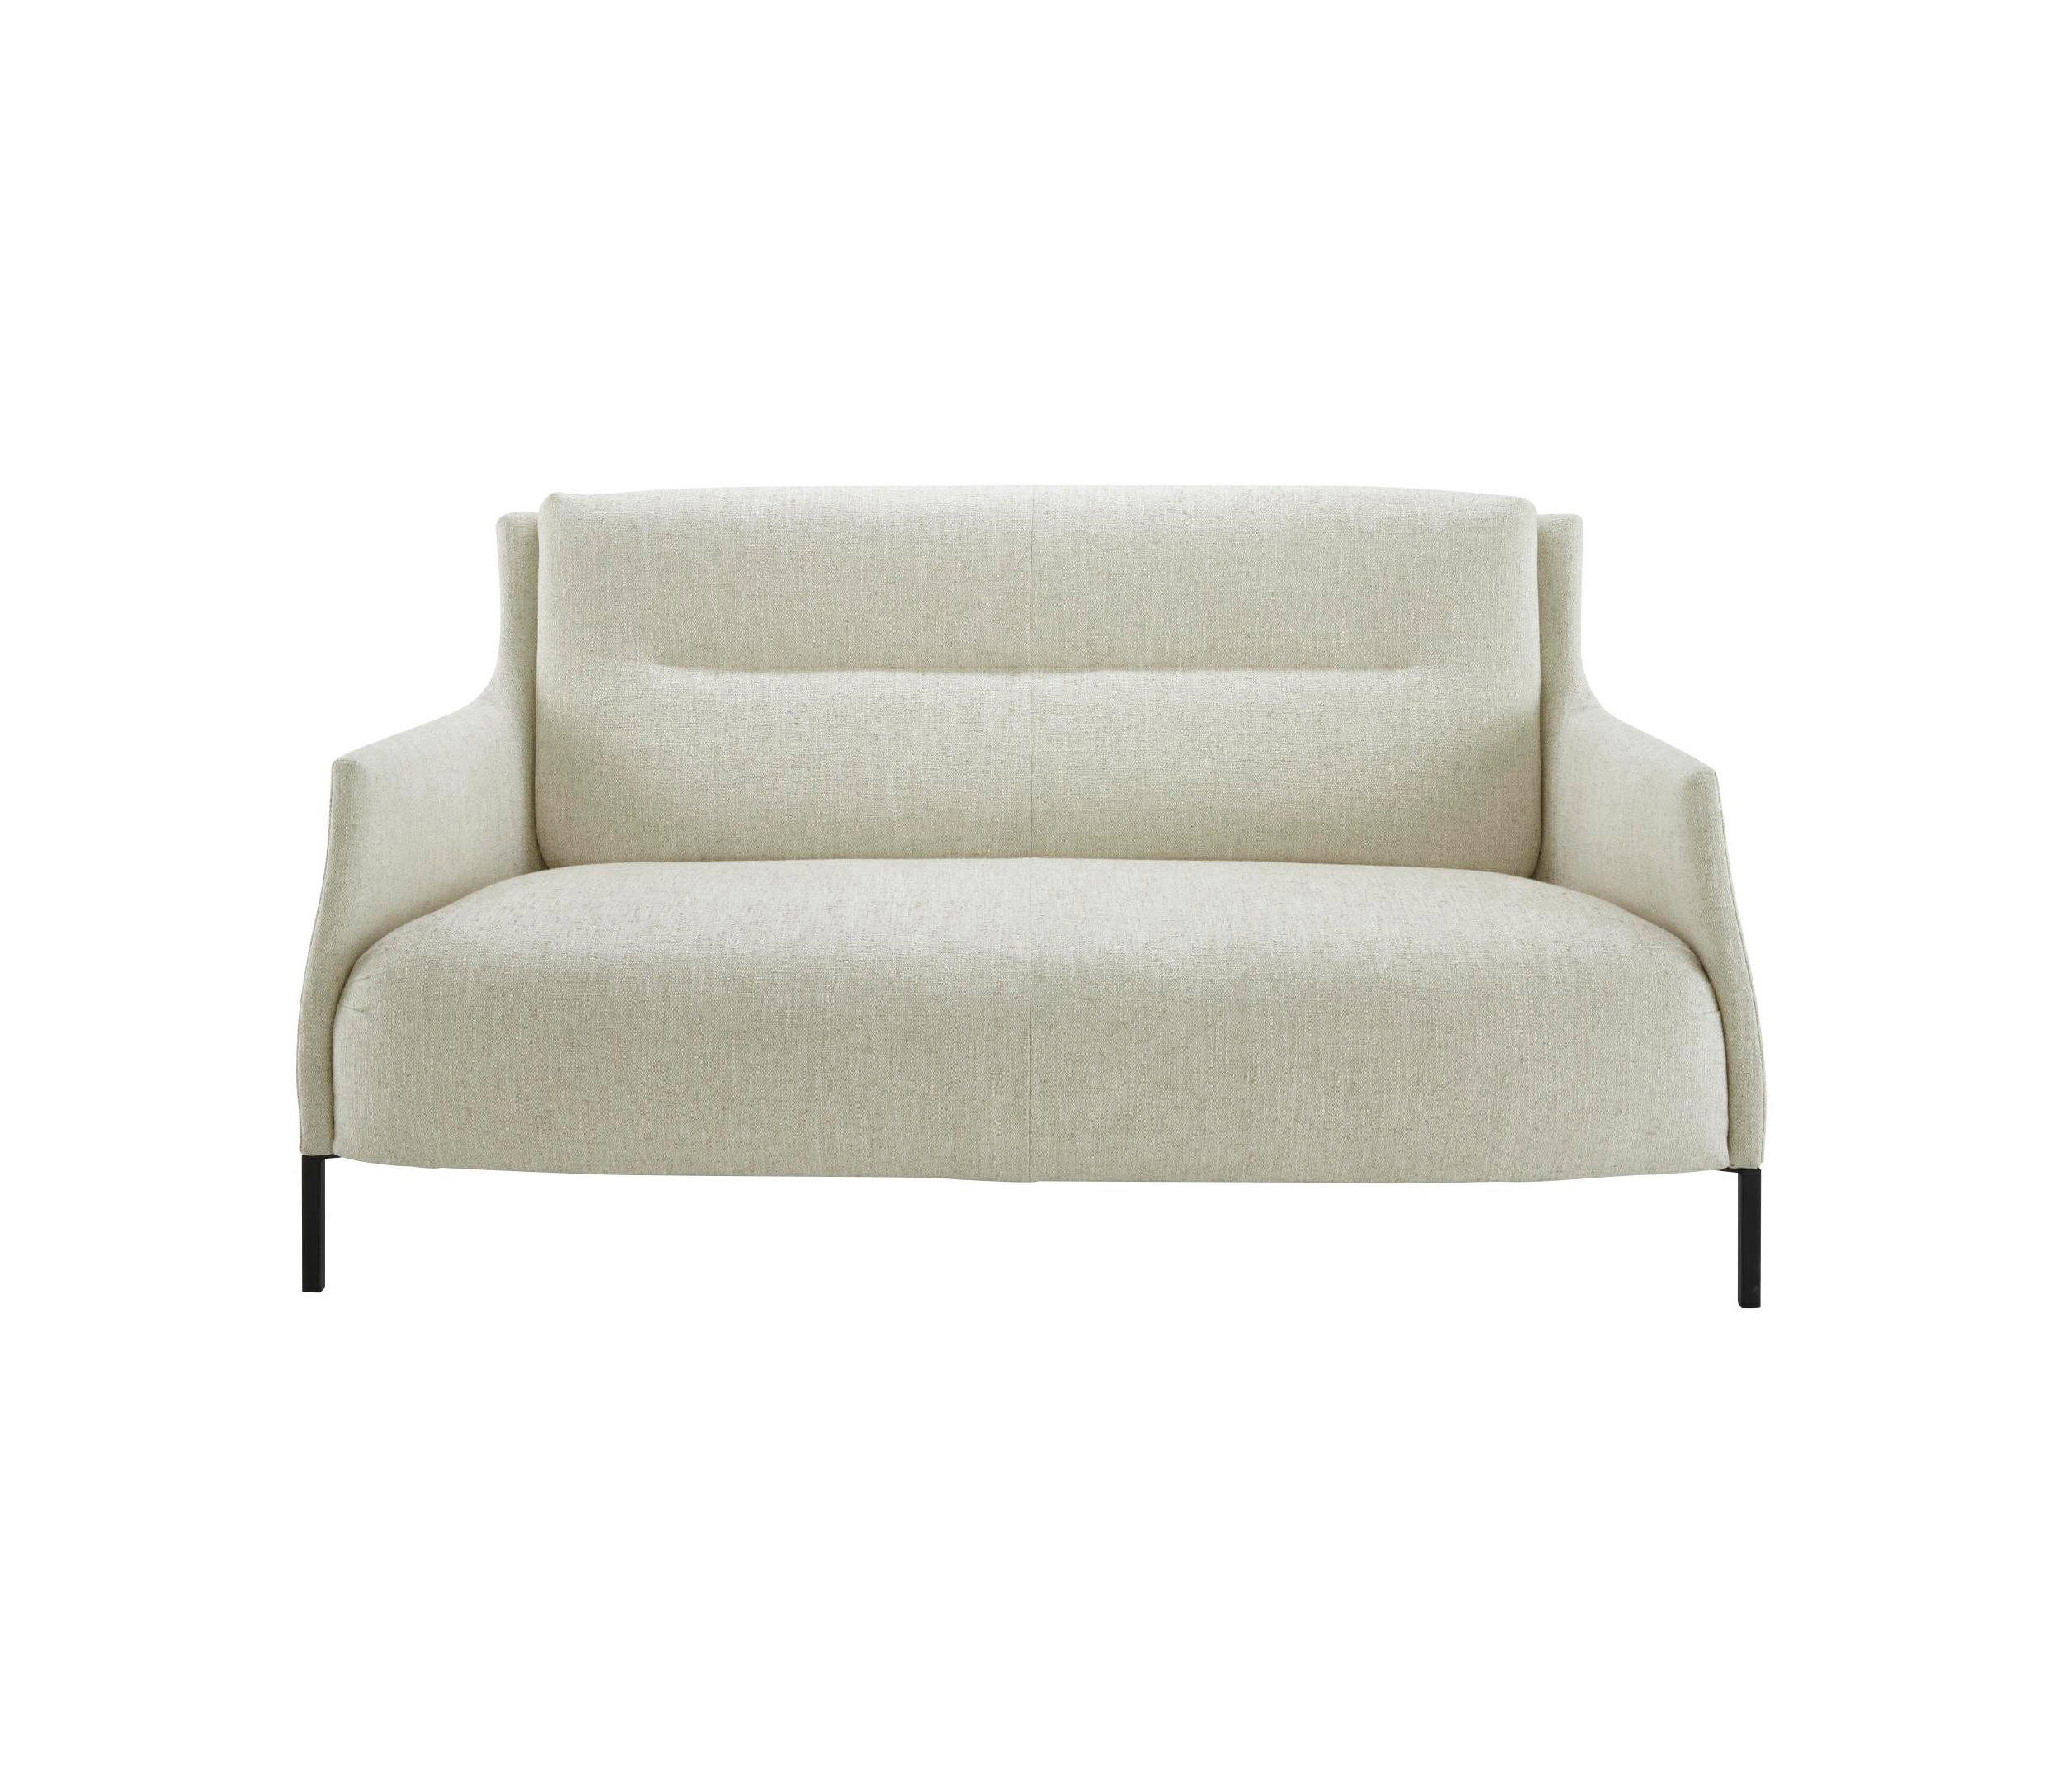 Riga | Settee With Base Low Back Complete Item | Architonic